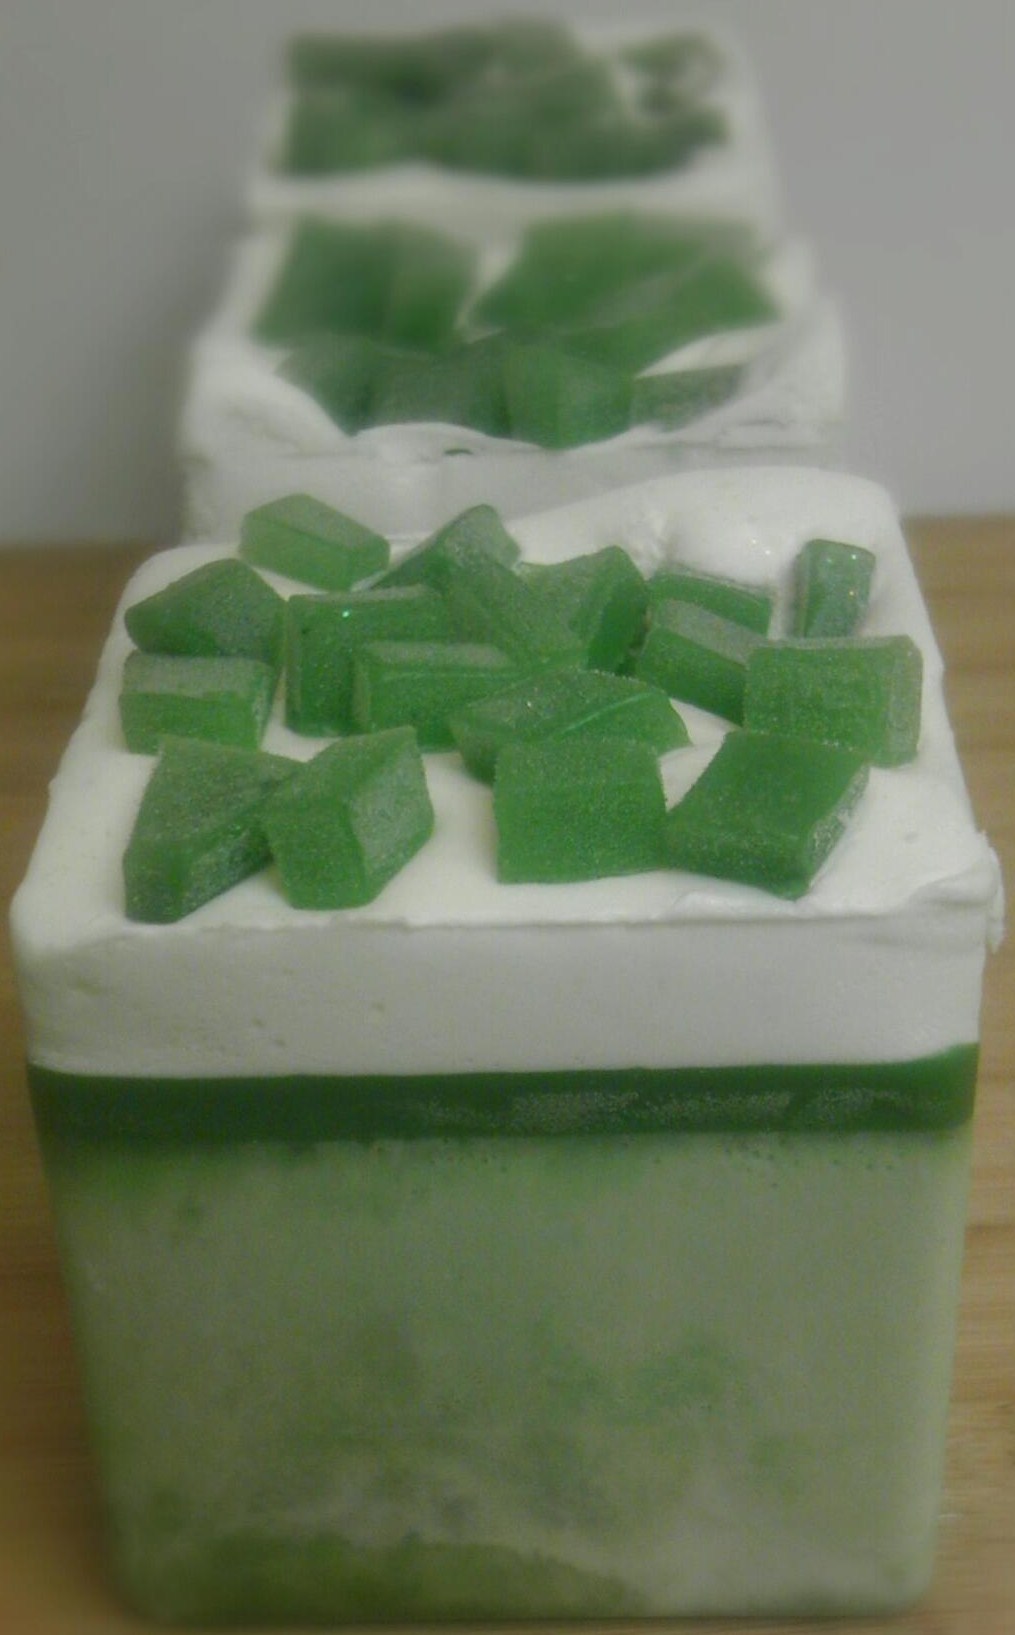 cucumber melon soap, cucumber, melon, melon soap, cucumber soap, melt and pour soap, glycerin soap, handmade soap, handcrafted soap